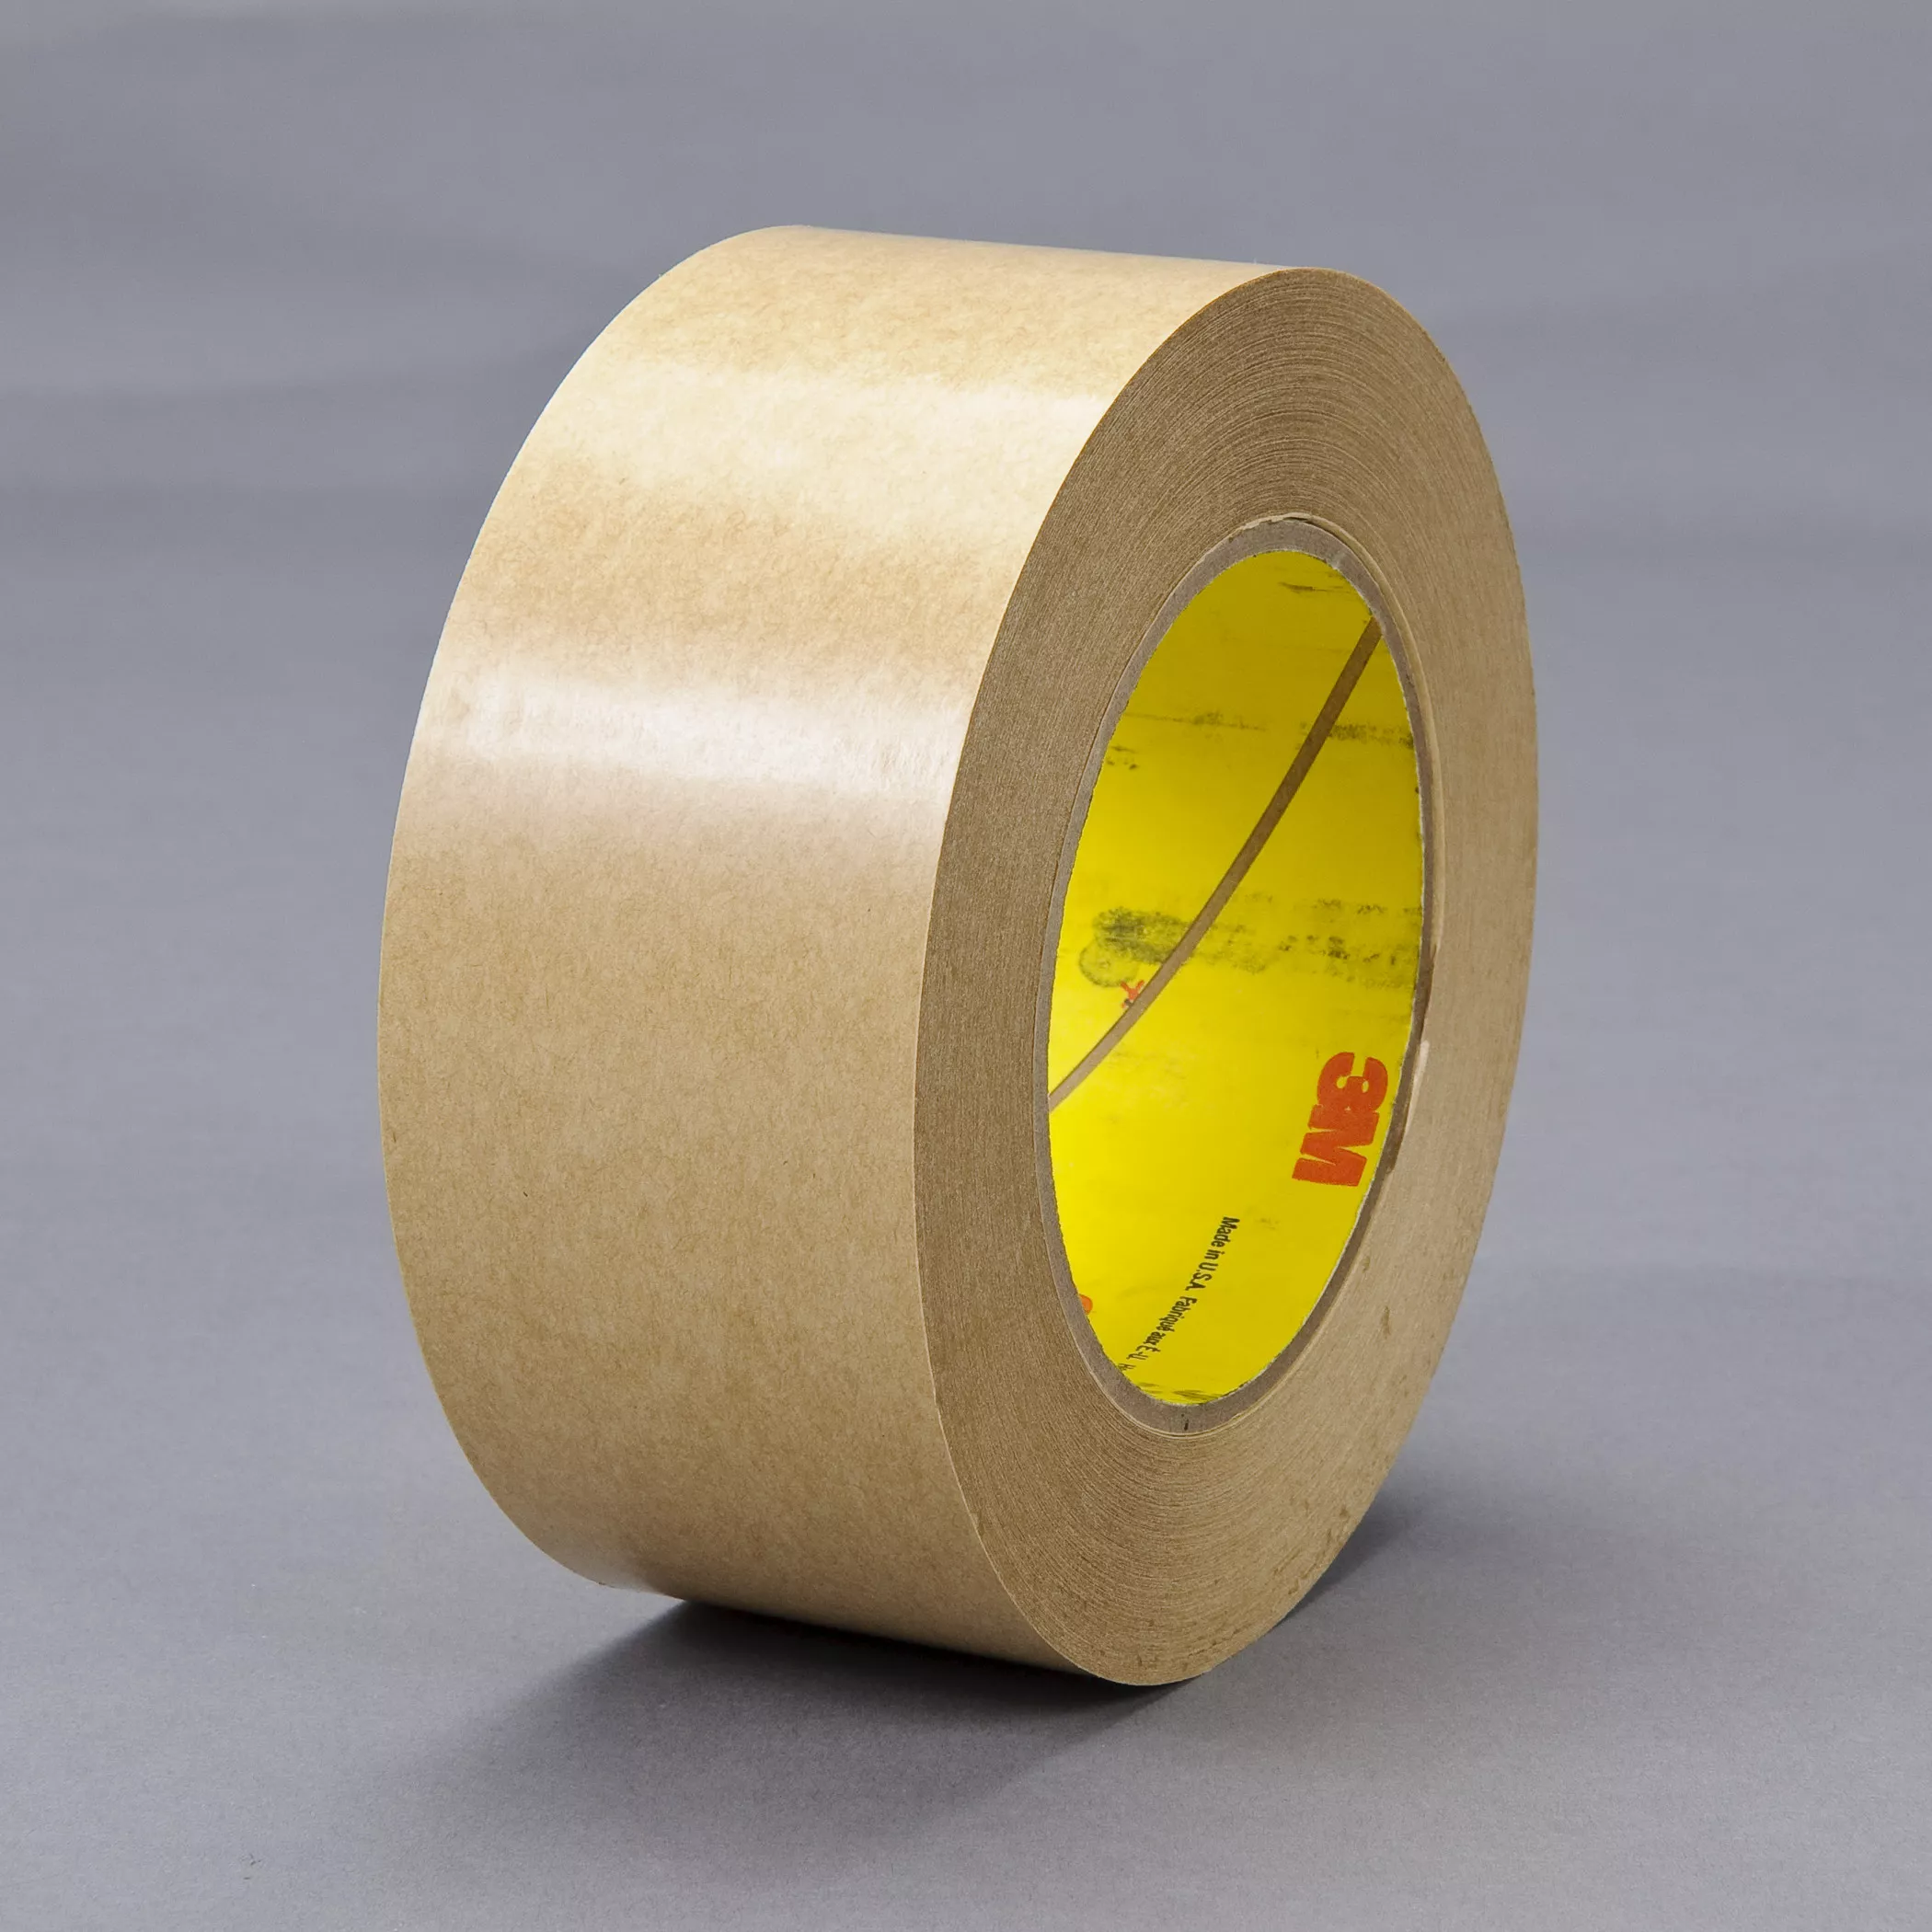 3M™ Adhesive Transfer Tape 465, Clear, 48 in x 60 yd, 2 mil, 1 roll per
case